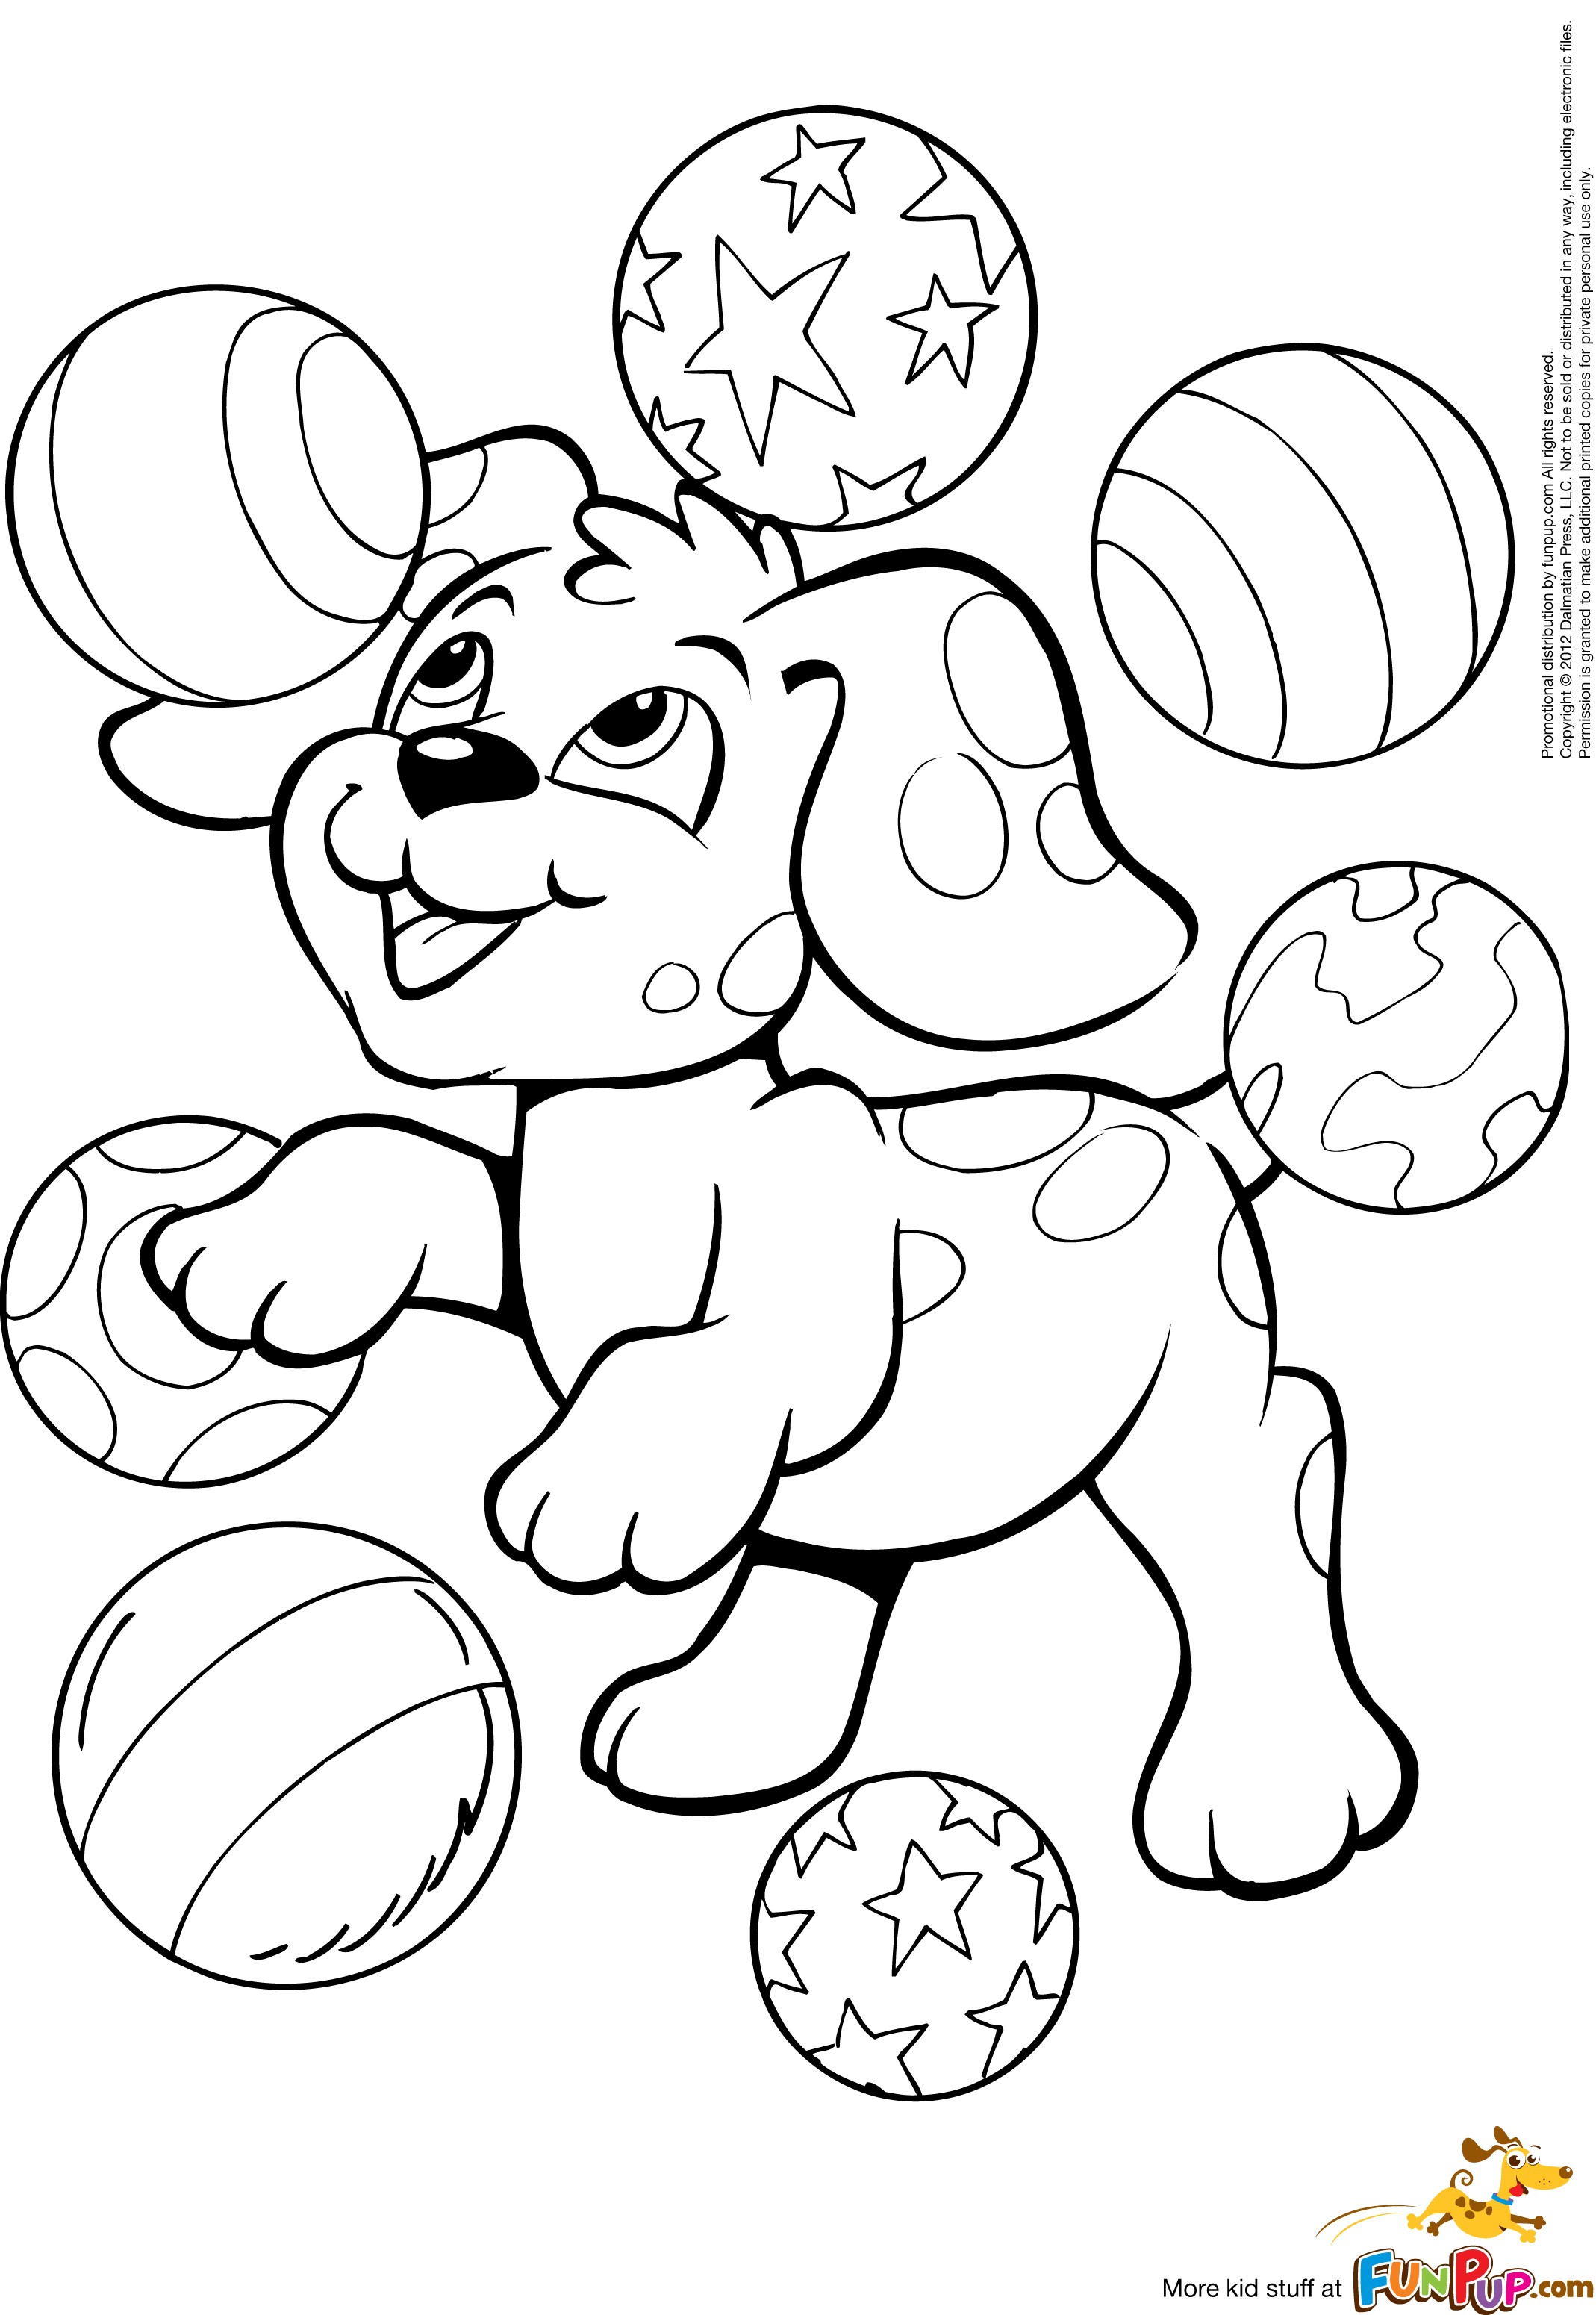 Featured image of post Puppy Coloring Sheets For Kids : We have collected 37+ free printable puppy coloring page images of various designs for you to color.